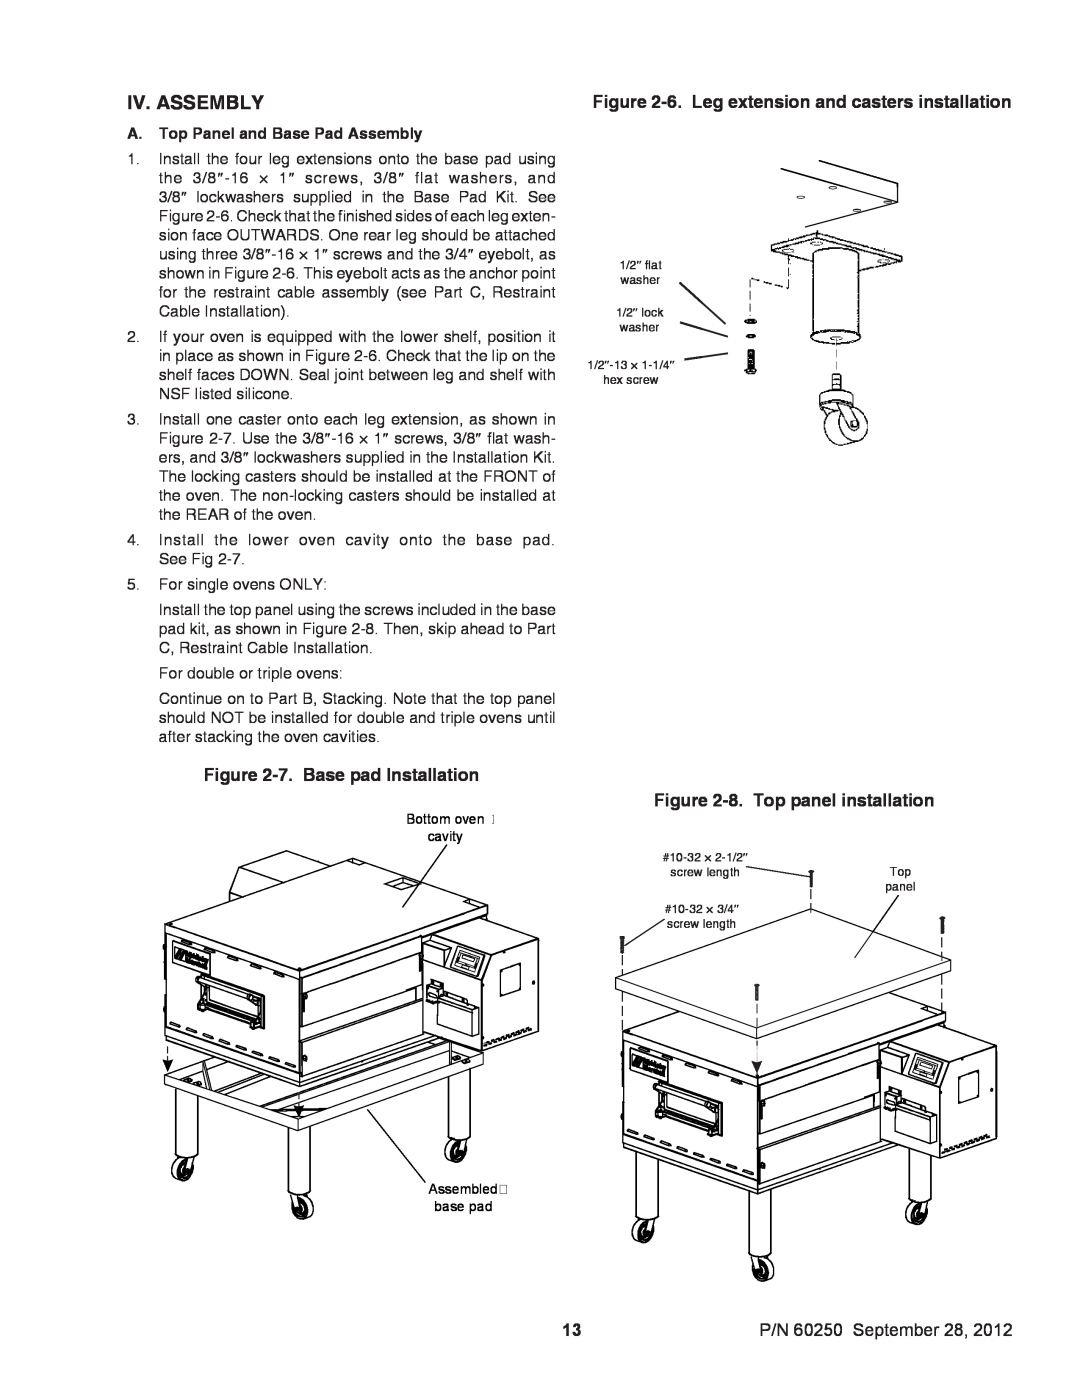 Middleby Marshall P/N 60250 Iv. Assembly, 7. Base pad Installation, 6. Leg extension and casters installation 